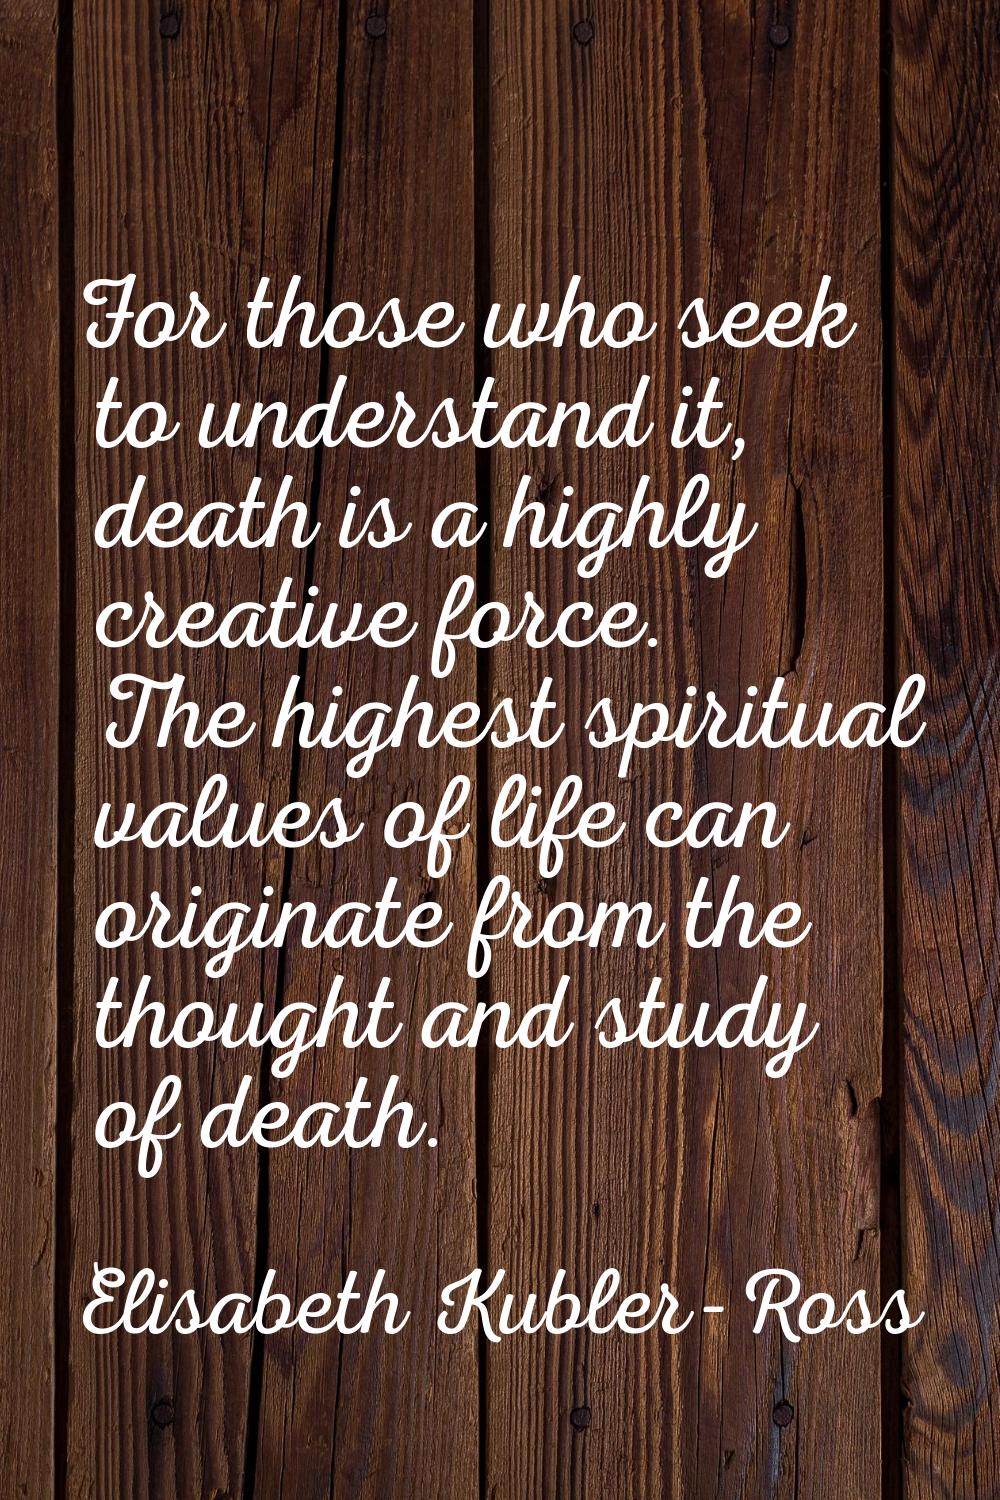 For those who seek to understand it, death is a highly creative force. The highest spiritual values